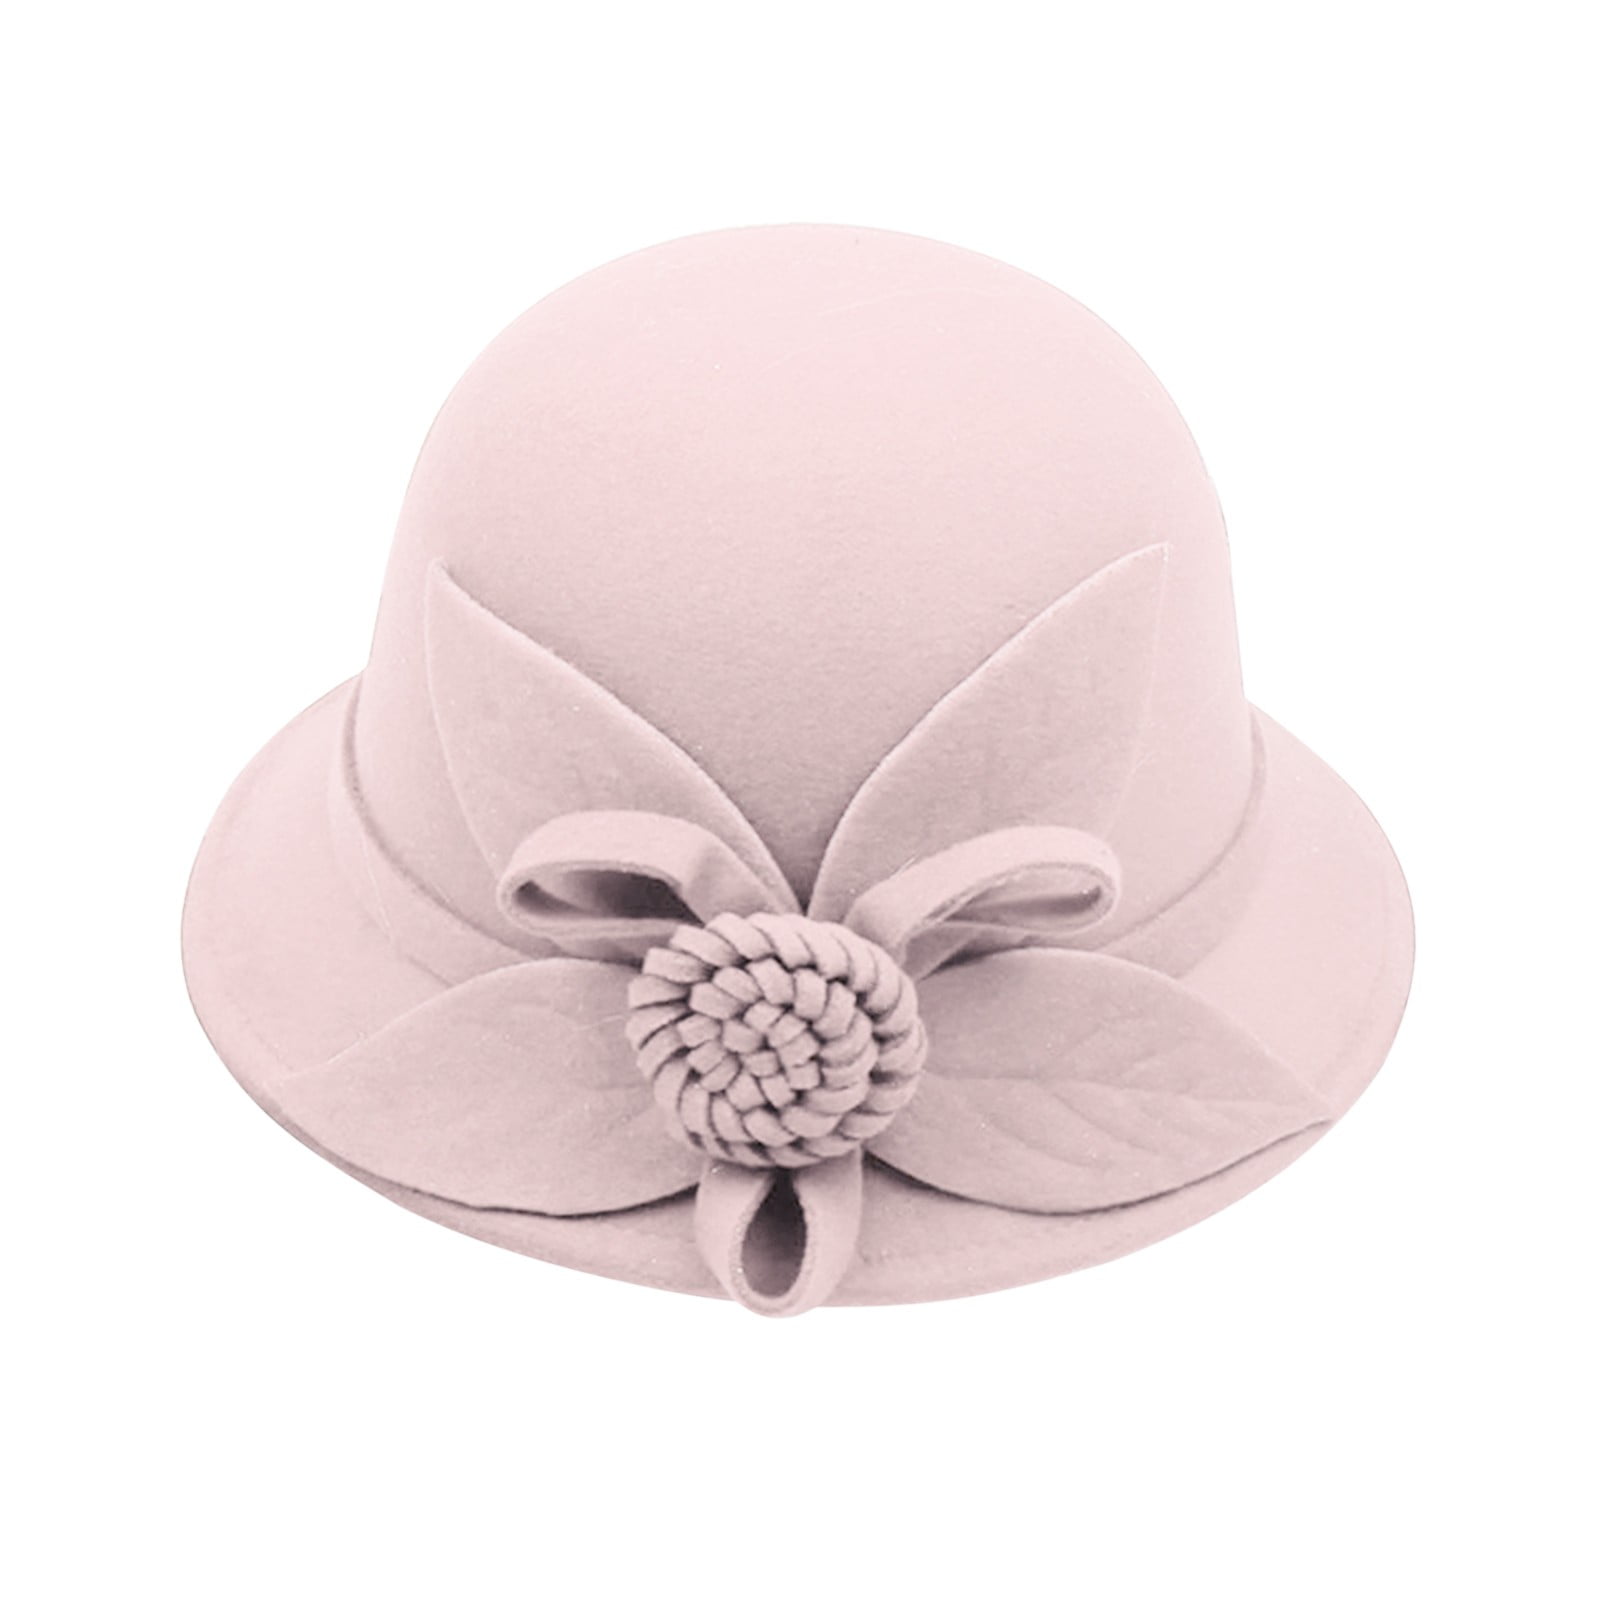 Cap for Women Basic Plain Sun Protection Relaxed Fit Performance